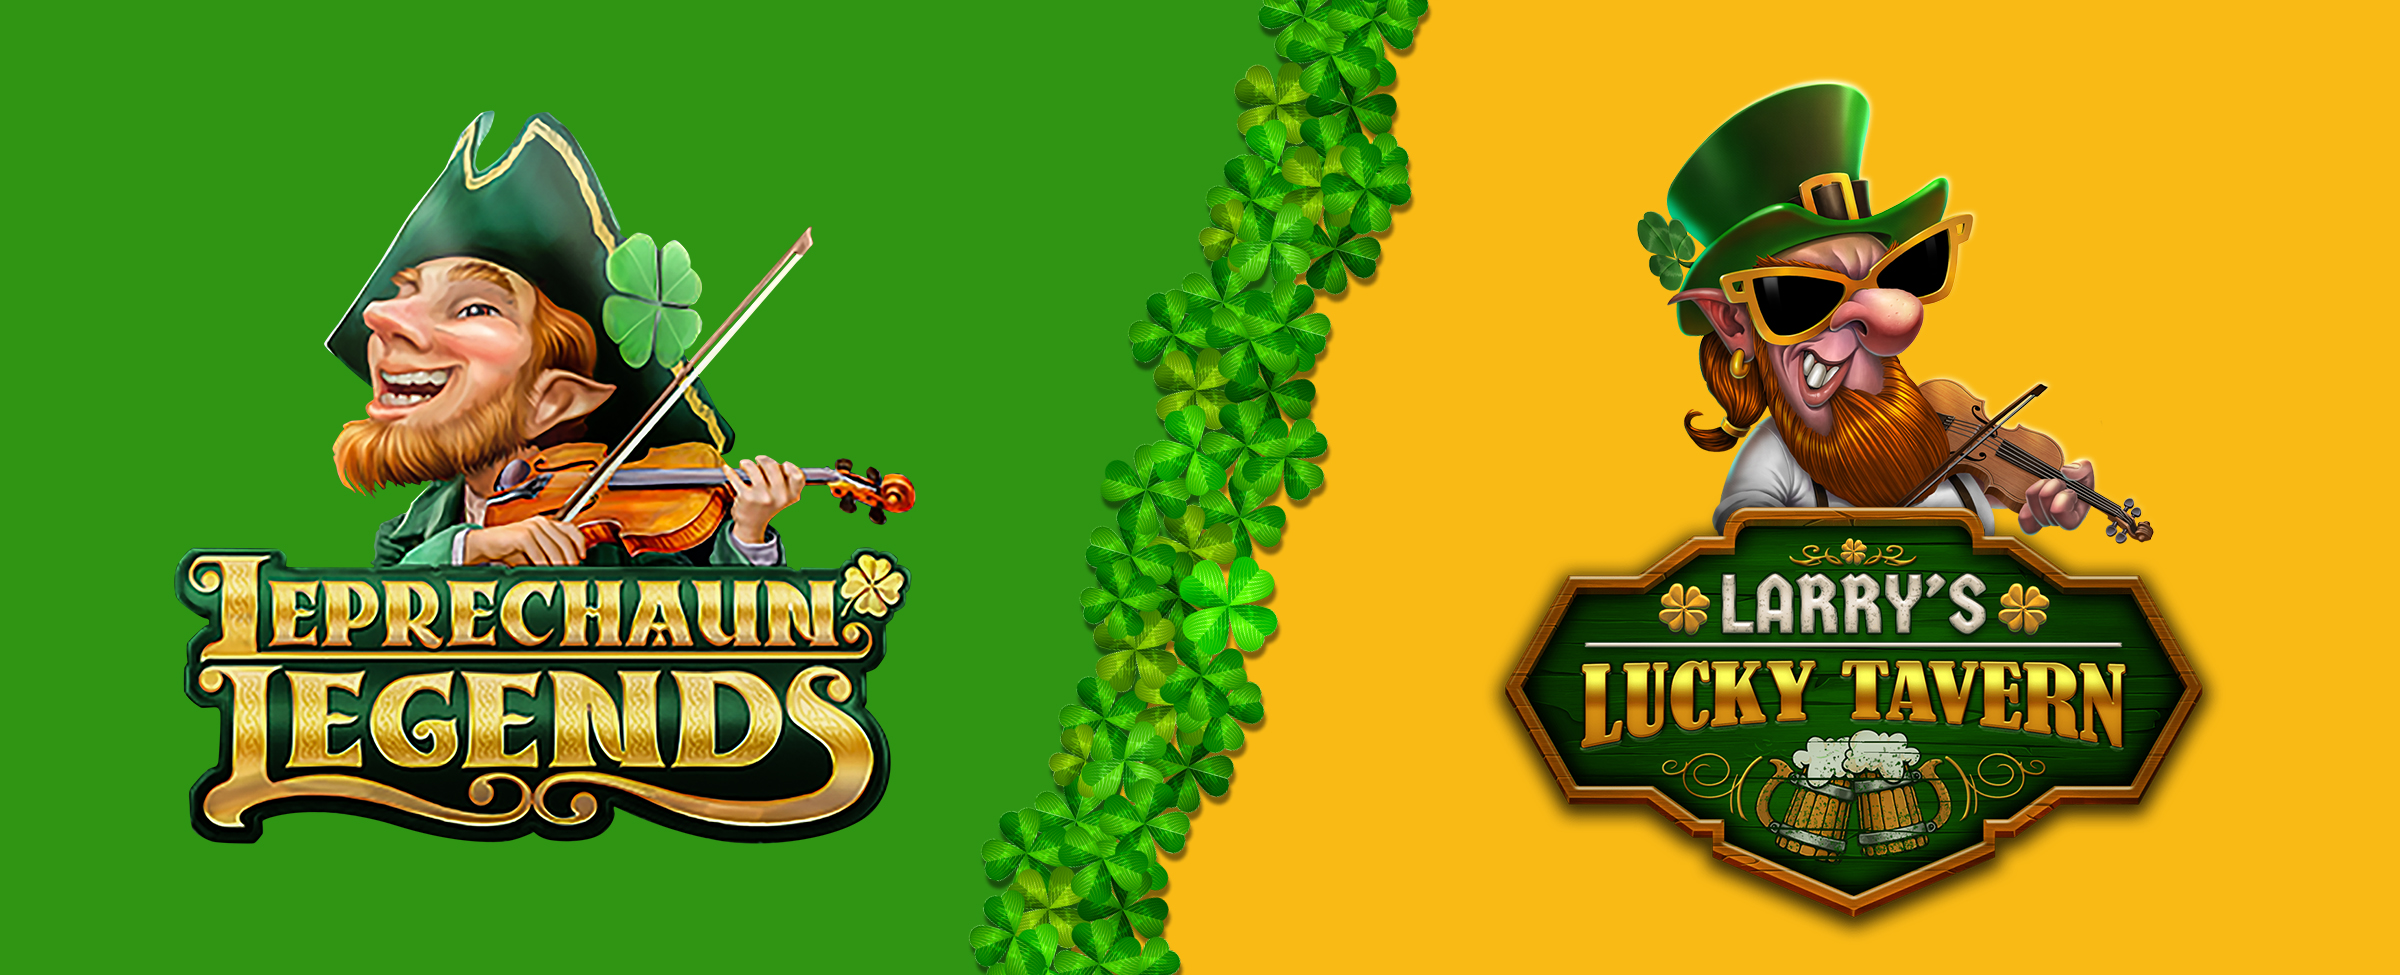 First up, we’ve got Larry’s Lucky Tavern and Leprechaun Legends. Why not try both!